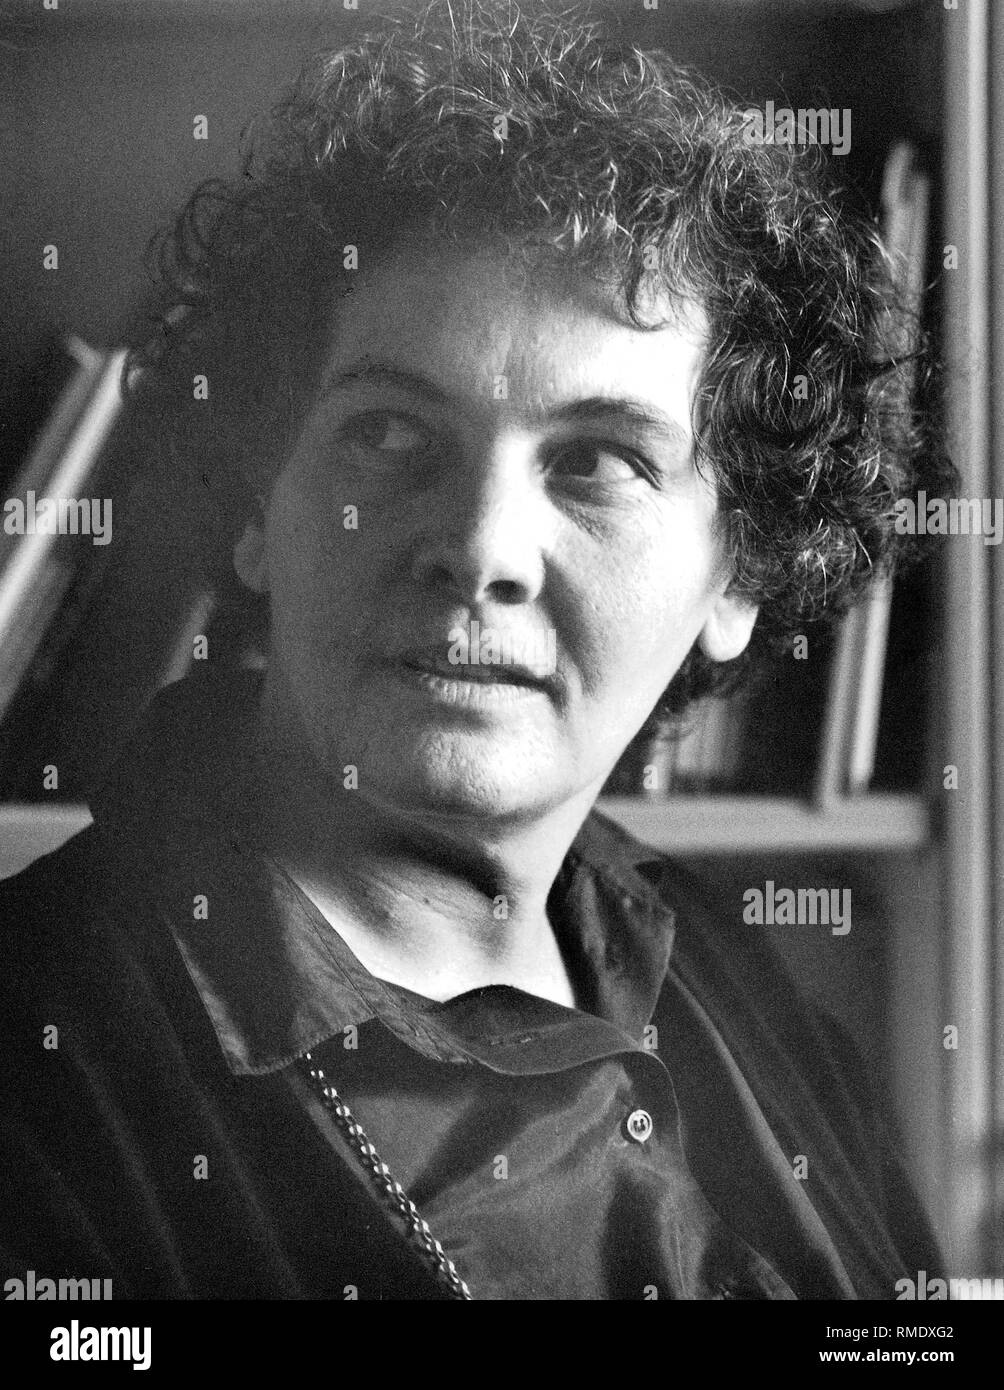 Christiane Nuesslein-Volhard (born Oct. 20, 1942), German biologist, biochemist and scientist at the Max Planck Institute (genetics). In 1995 she received the Nobel Prize. Stock Photo